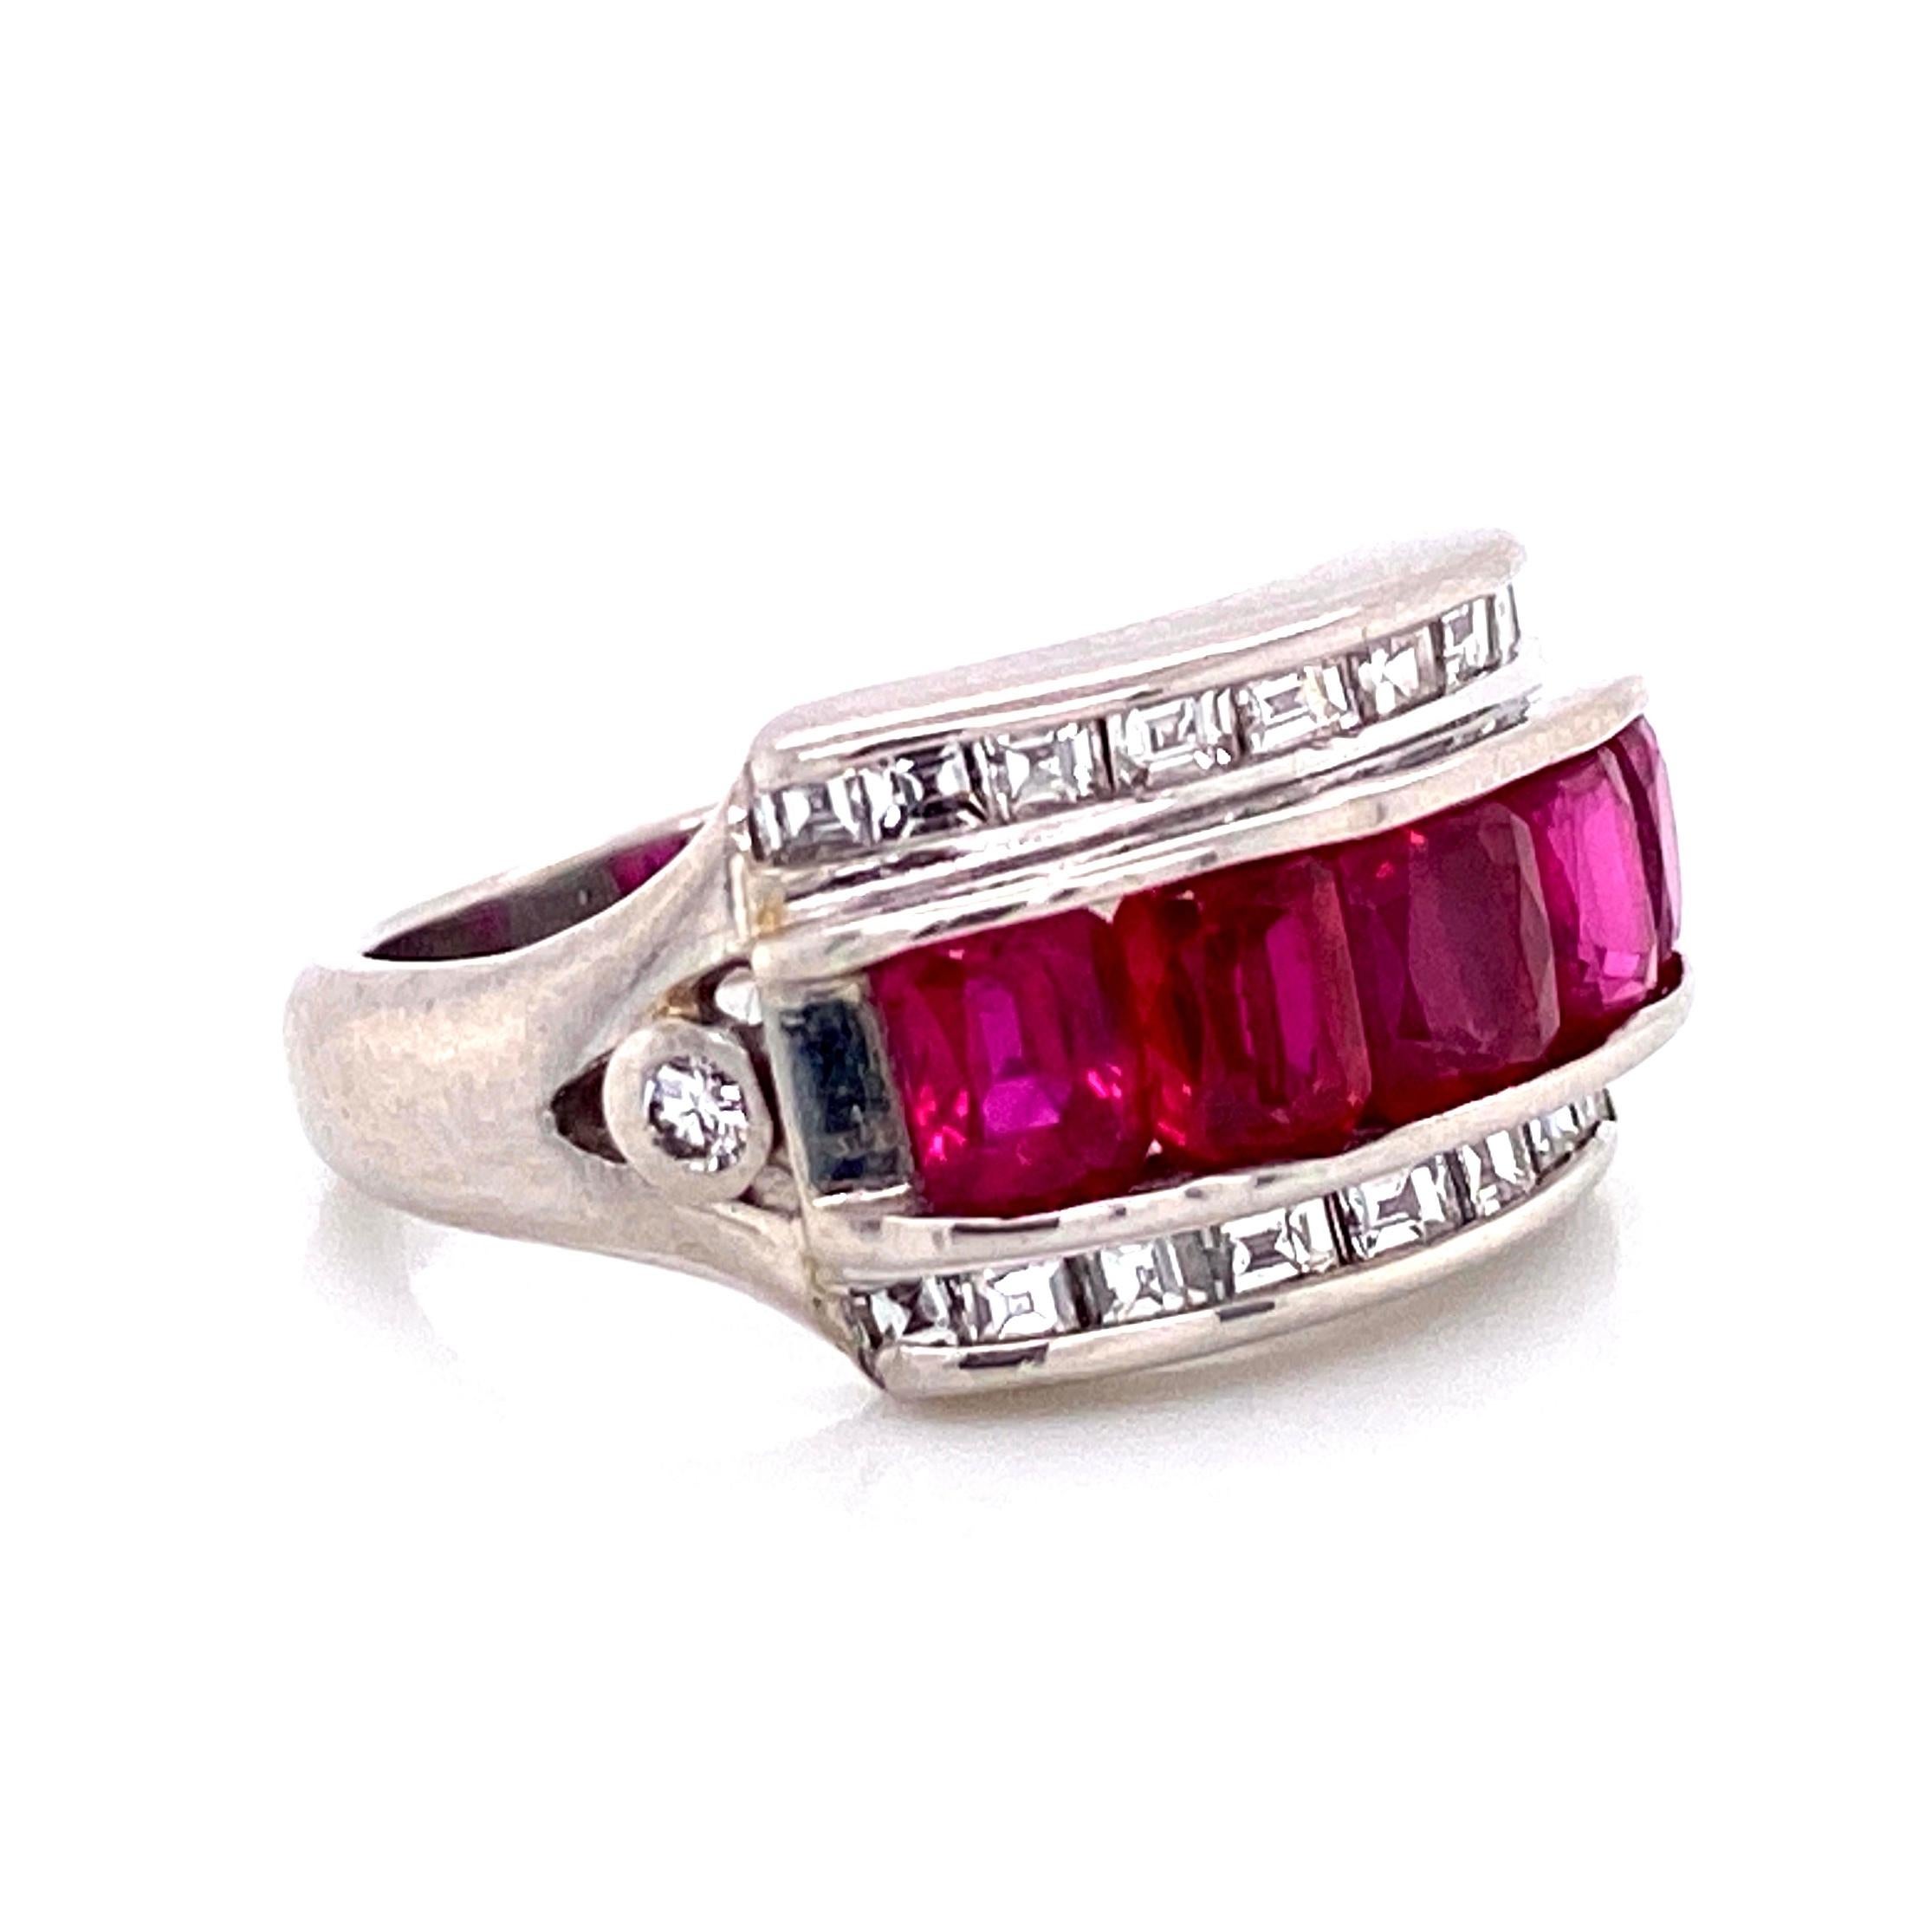 Simply Beautiful! Platinum Cocktail Band Ring, securely set with 5 Fine high quality French cut Rubies, weighing approx. 2.07 total carats and Diamonds weighing approx. 0.65 total carat. Hand crafted in Platinum. Measuring approx. 0.75”w x 0.39”h x